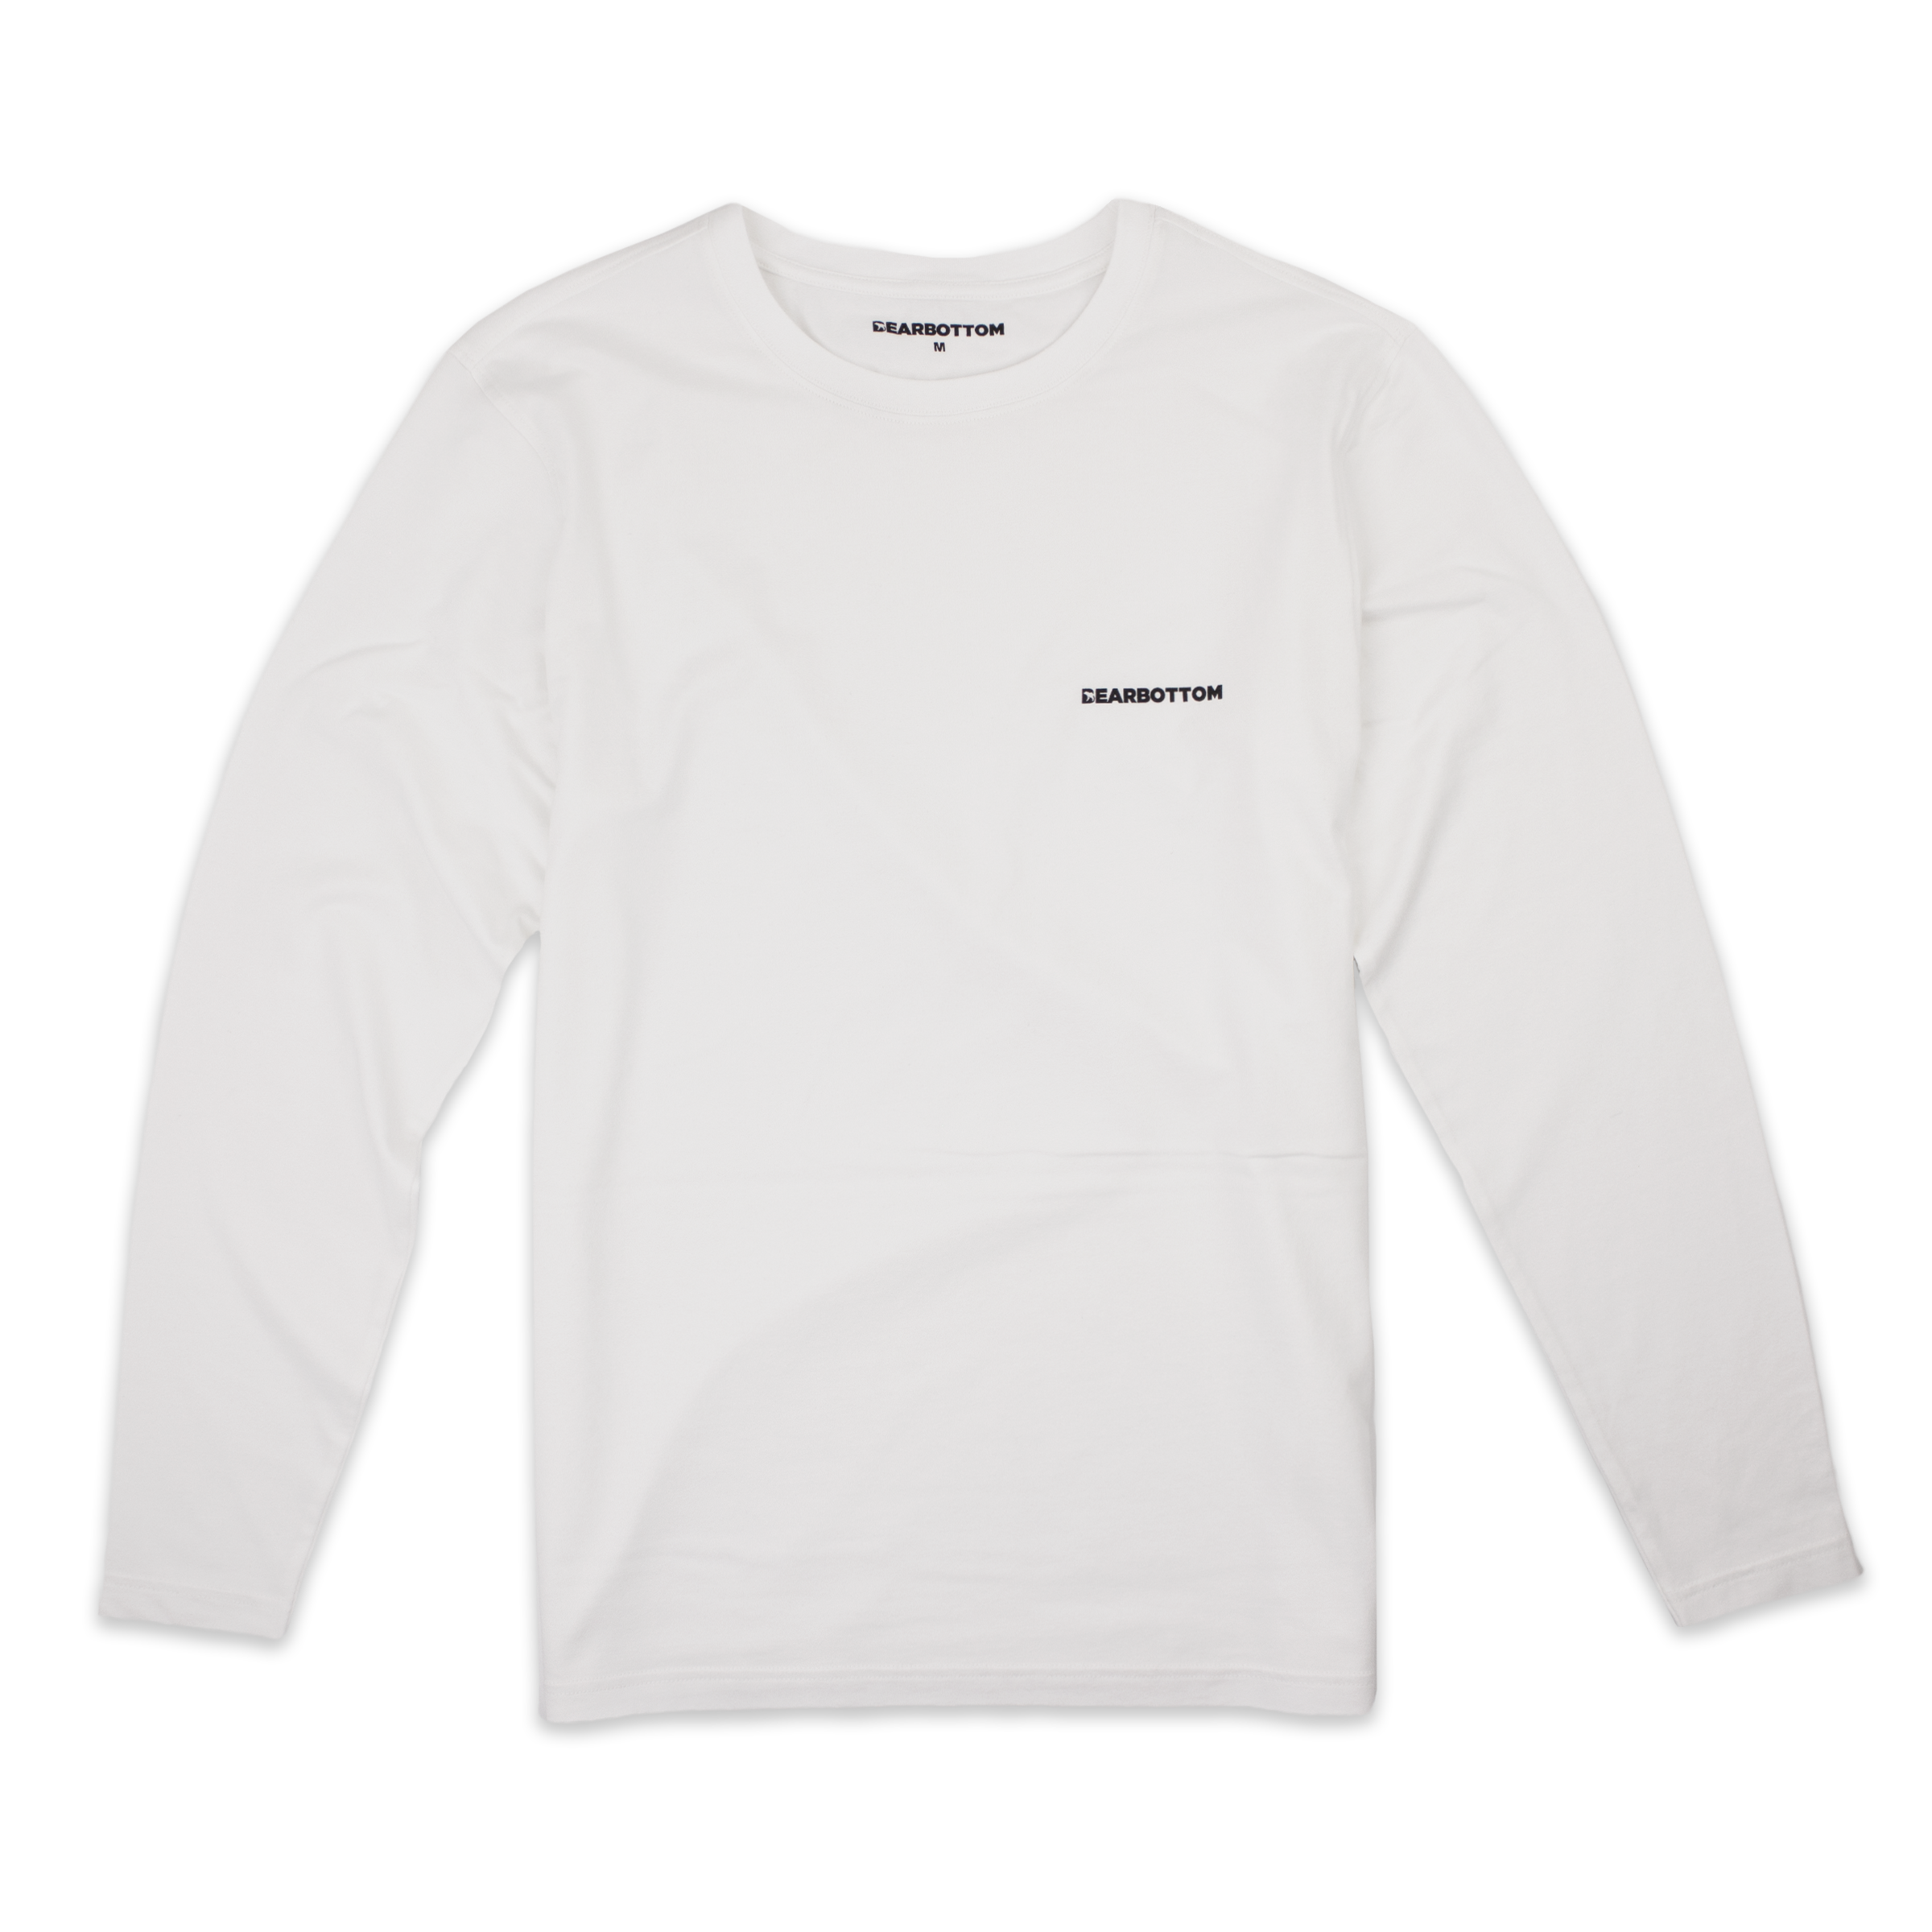 Natural Dye Logo Long Sleeve Tee in White with Crewneck and Bearbottom printed in black on front left chest